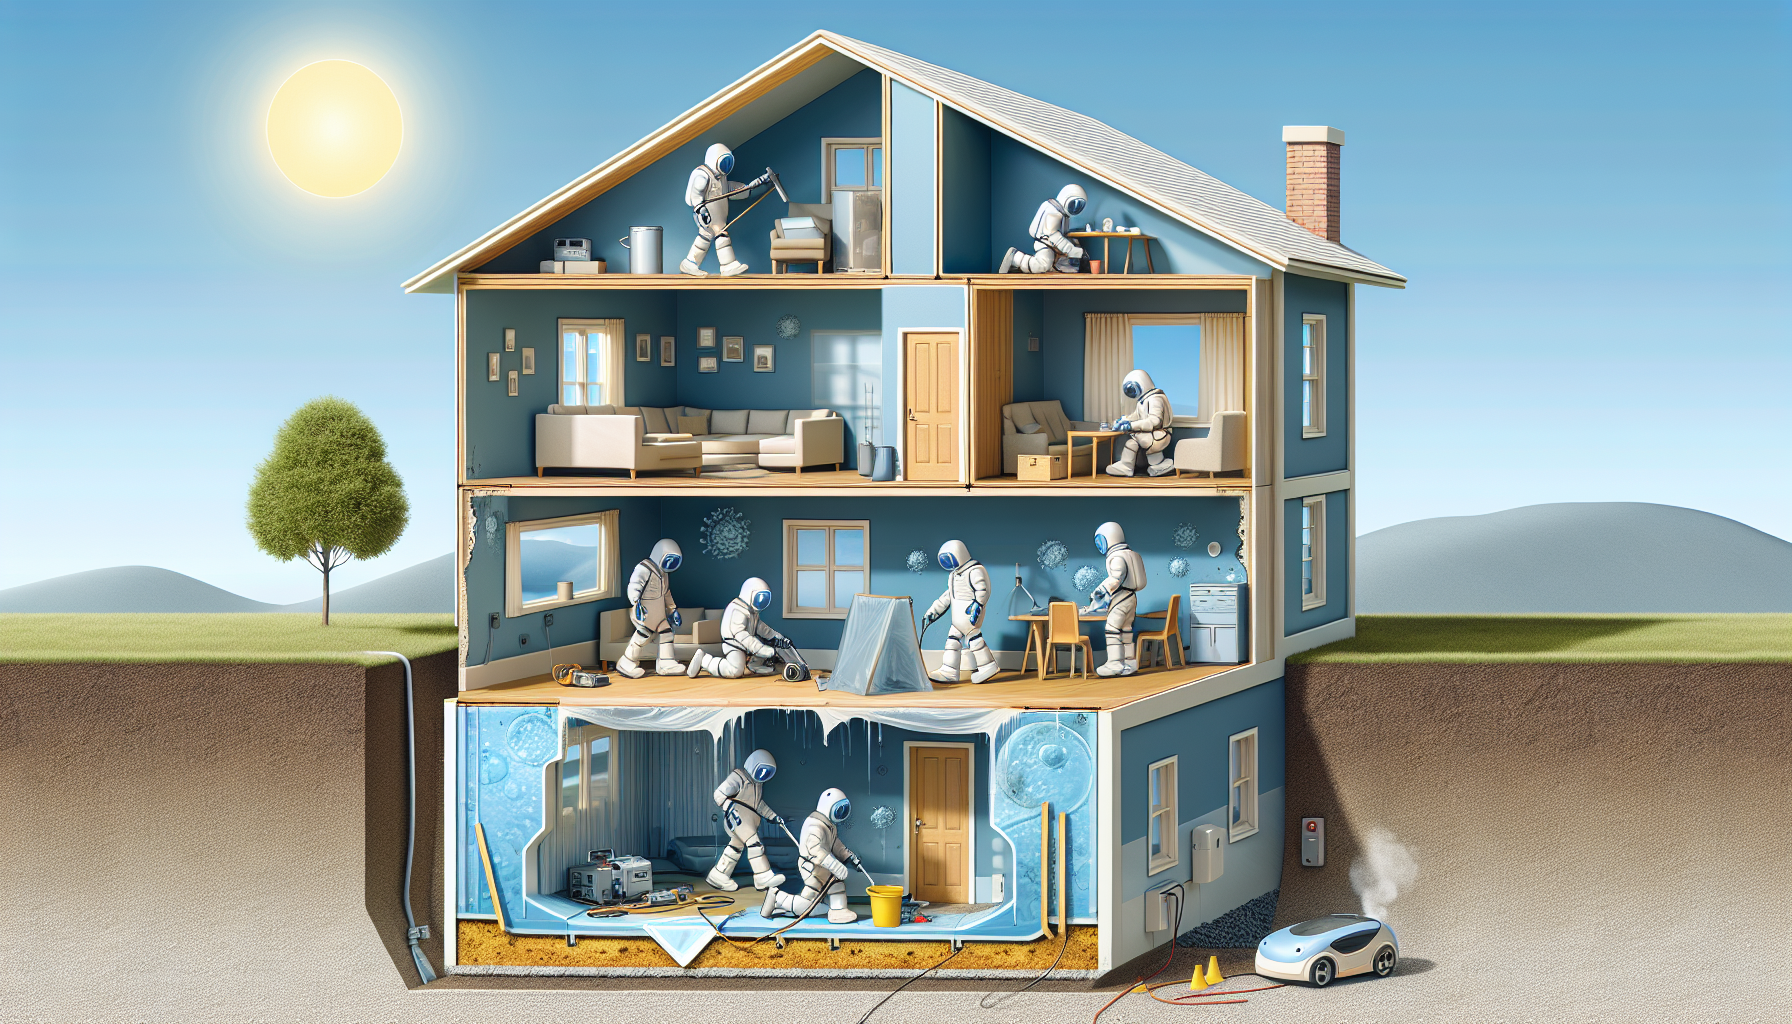 Illustration of mold growth and remediation process